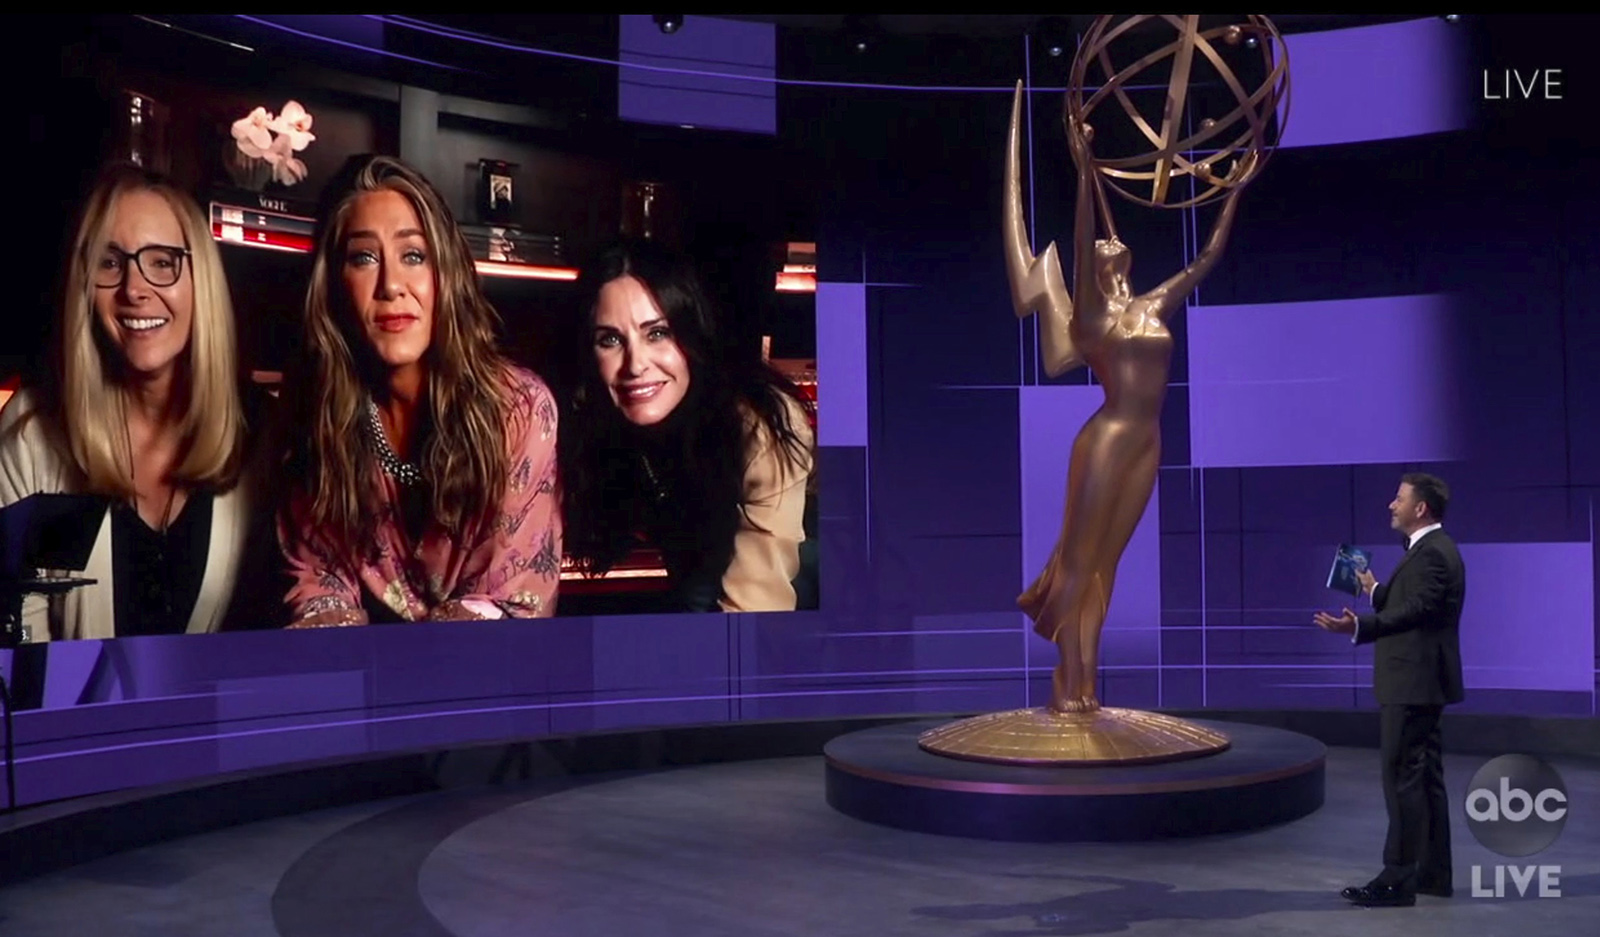 In this video grab captured on Sept. 20, 2020, courtesy of the Academy of Television Arts & Sciences and ABC Entertainment, Jimmy Kimmel, right, speaks with actors, from left, Lisa Kudrow, Jennifer Aniston and Courteney Cox during the 72nd Emmy Awards broadcast.